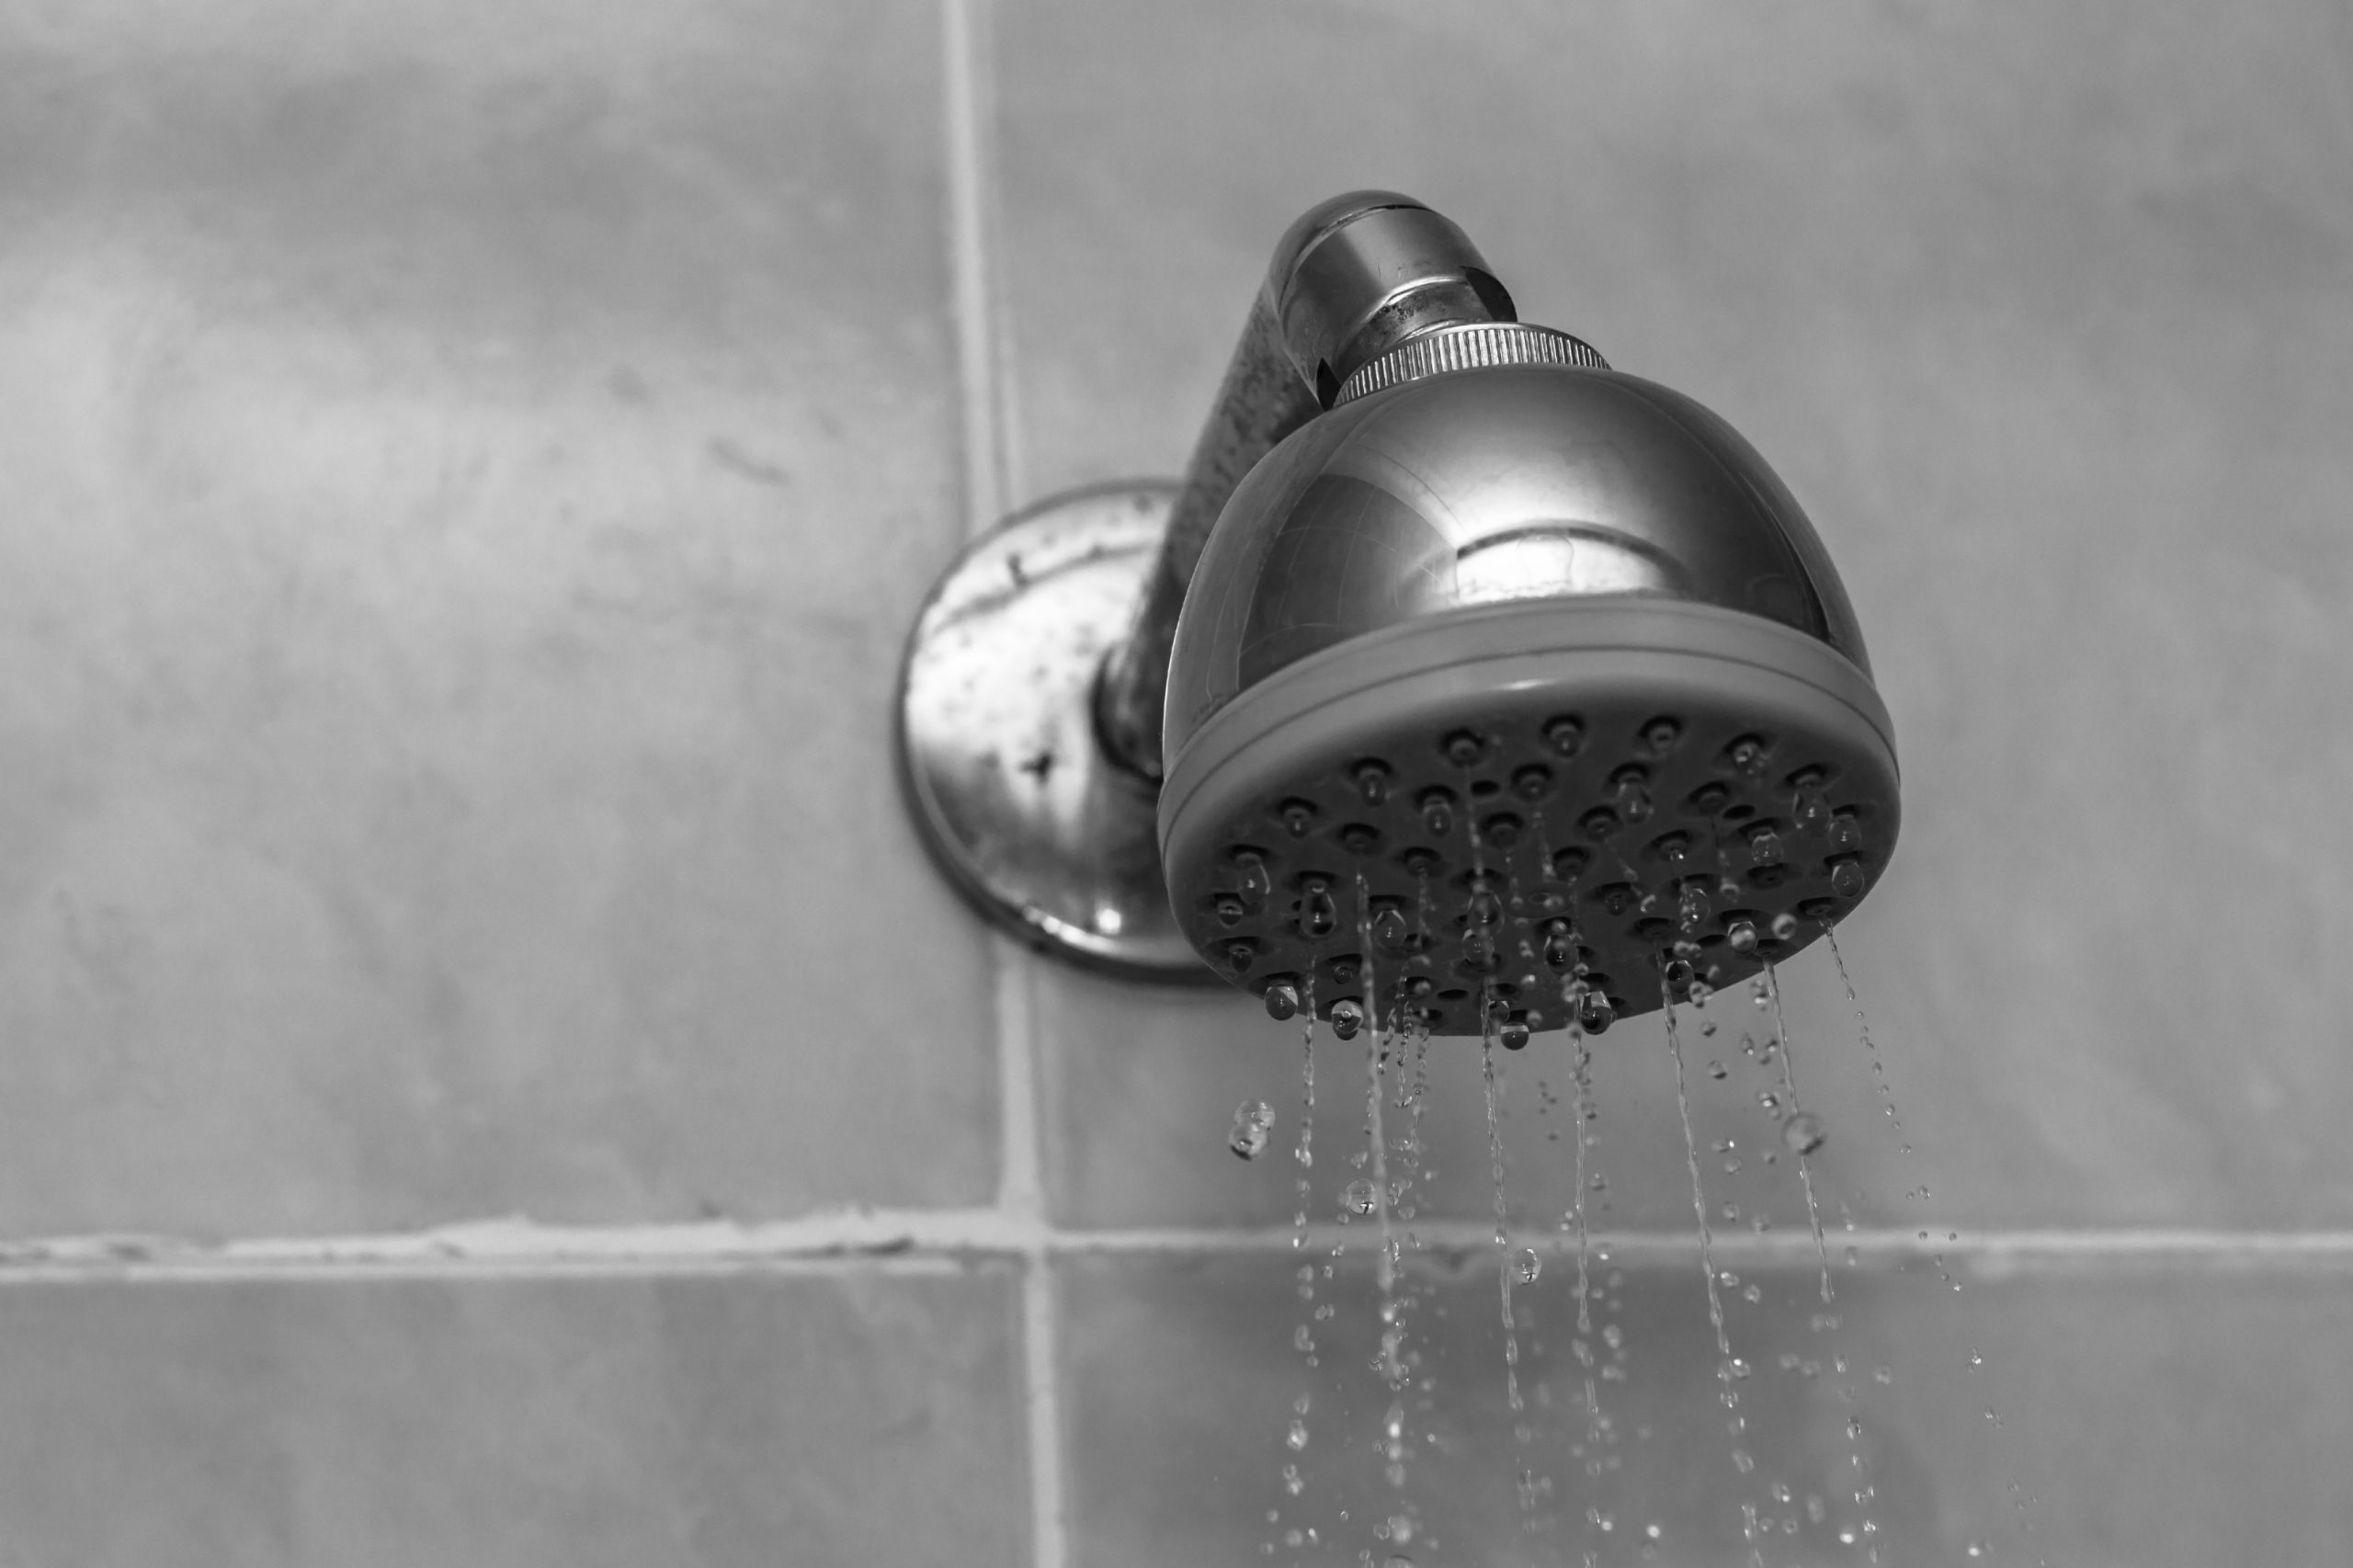 Tips For Changing The Shower Head In 2022